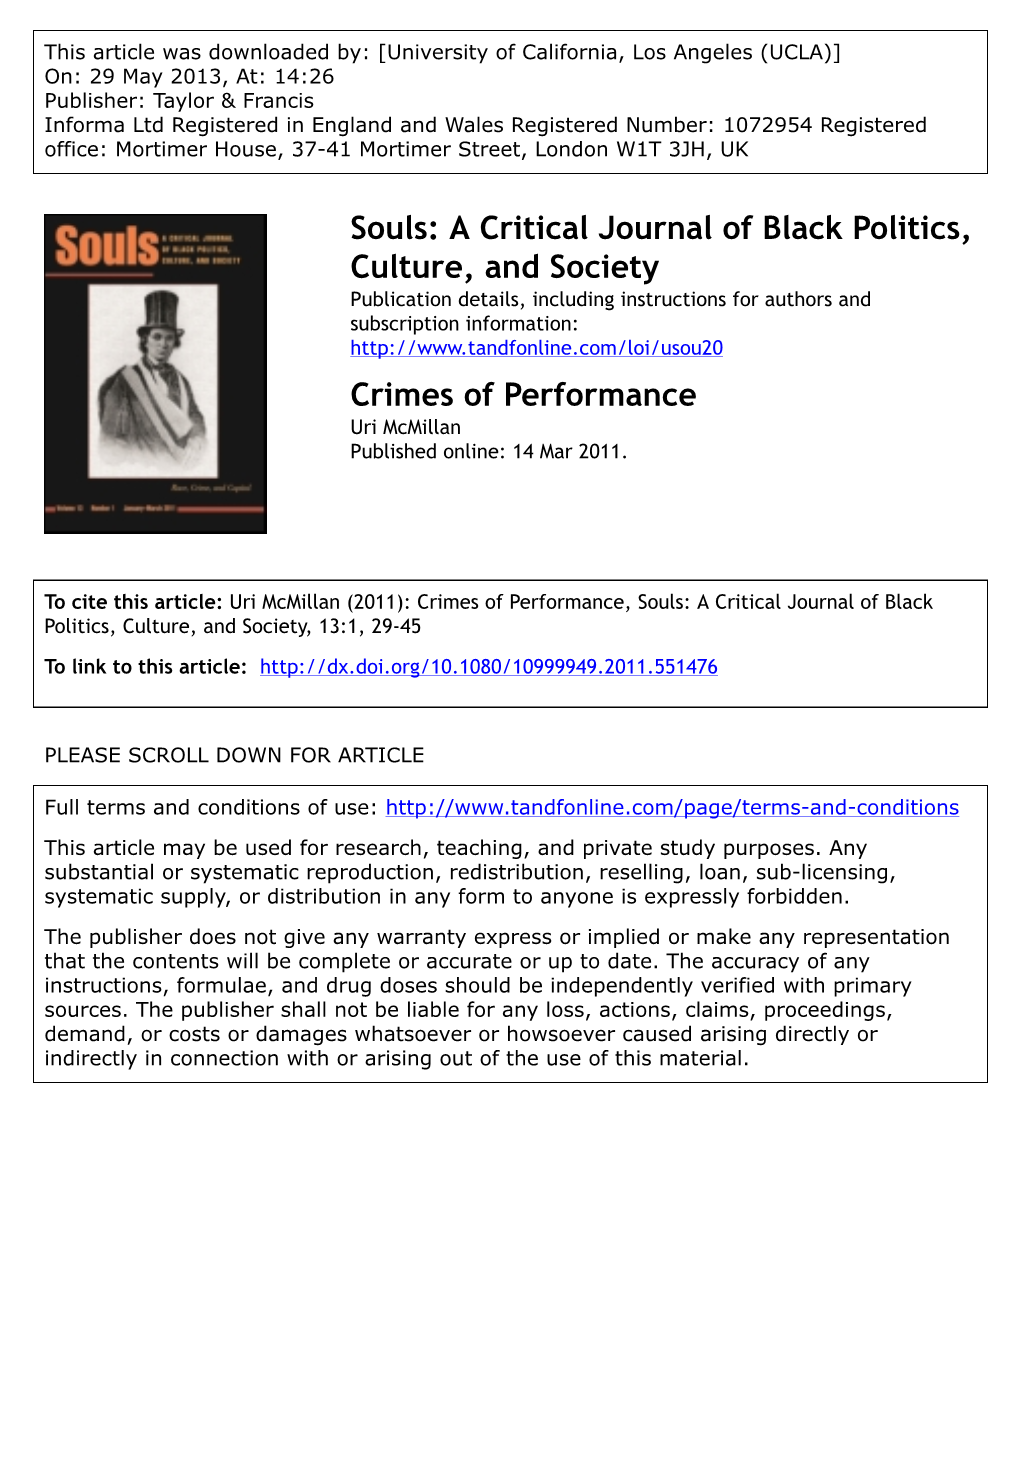 Crimes of Performance Uri Mcmillan Published Online: 14 Mar 2011